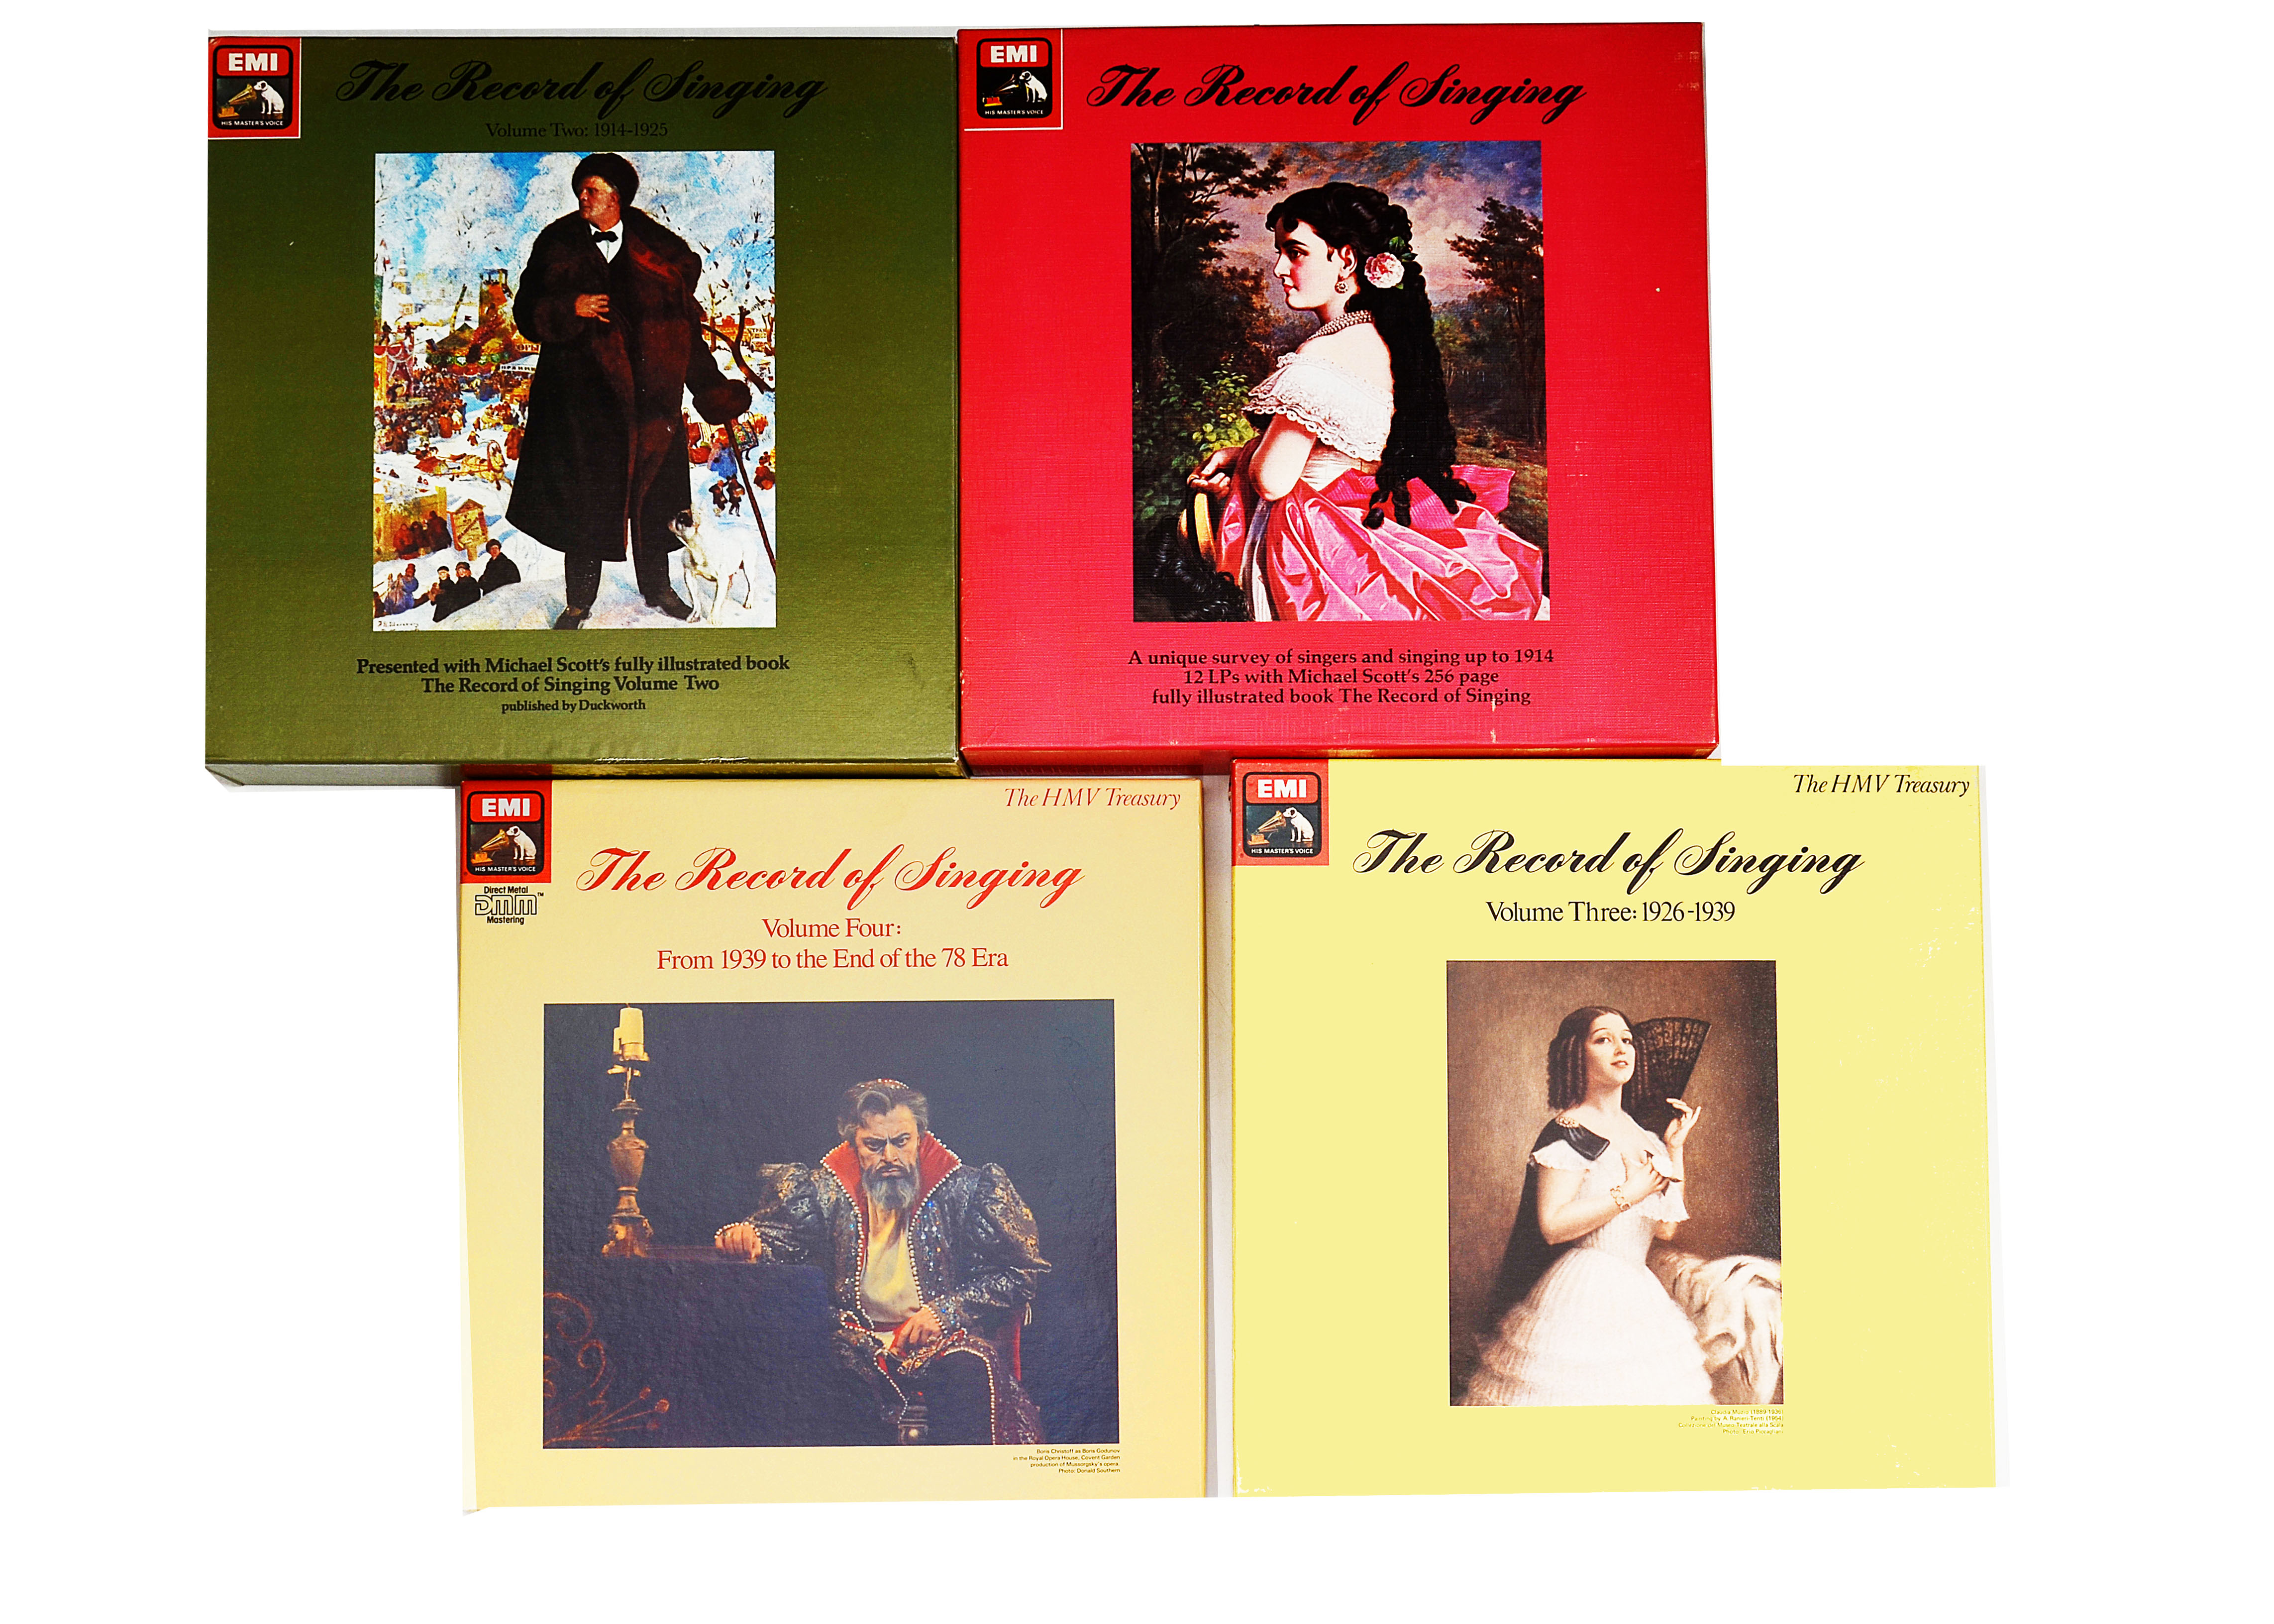 Vocal, four box sets - The Record Of Singing - Volumes 1 to 4 on HMV - mainly excellent condition